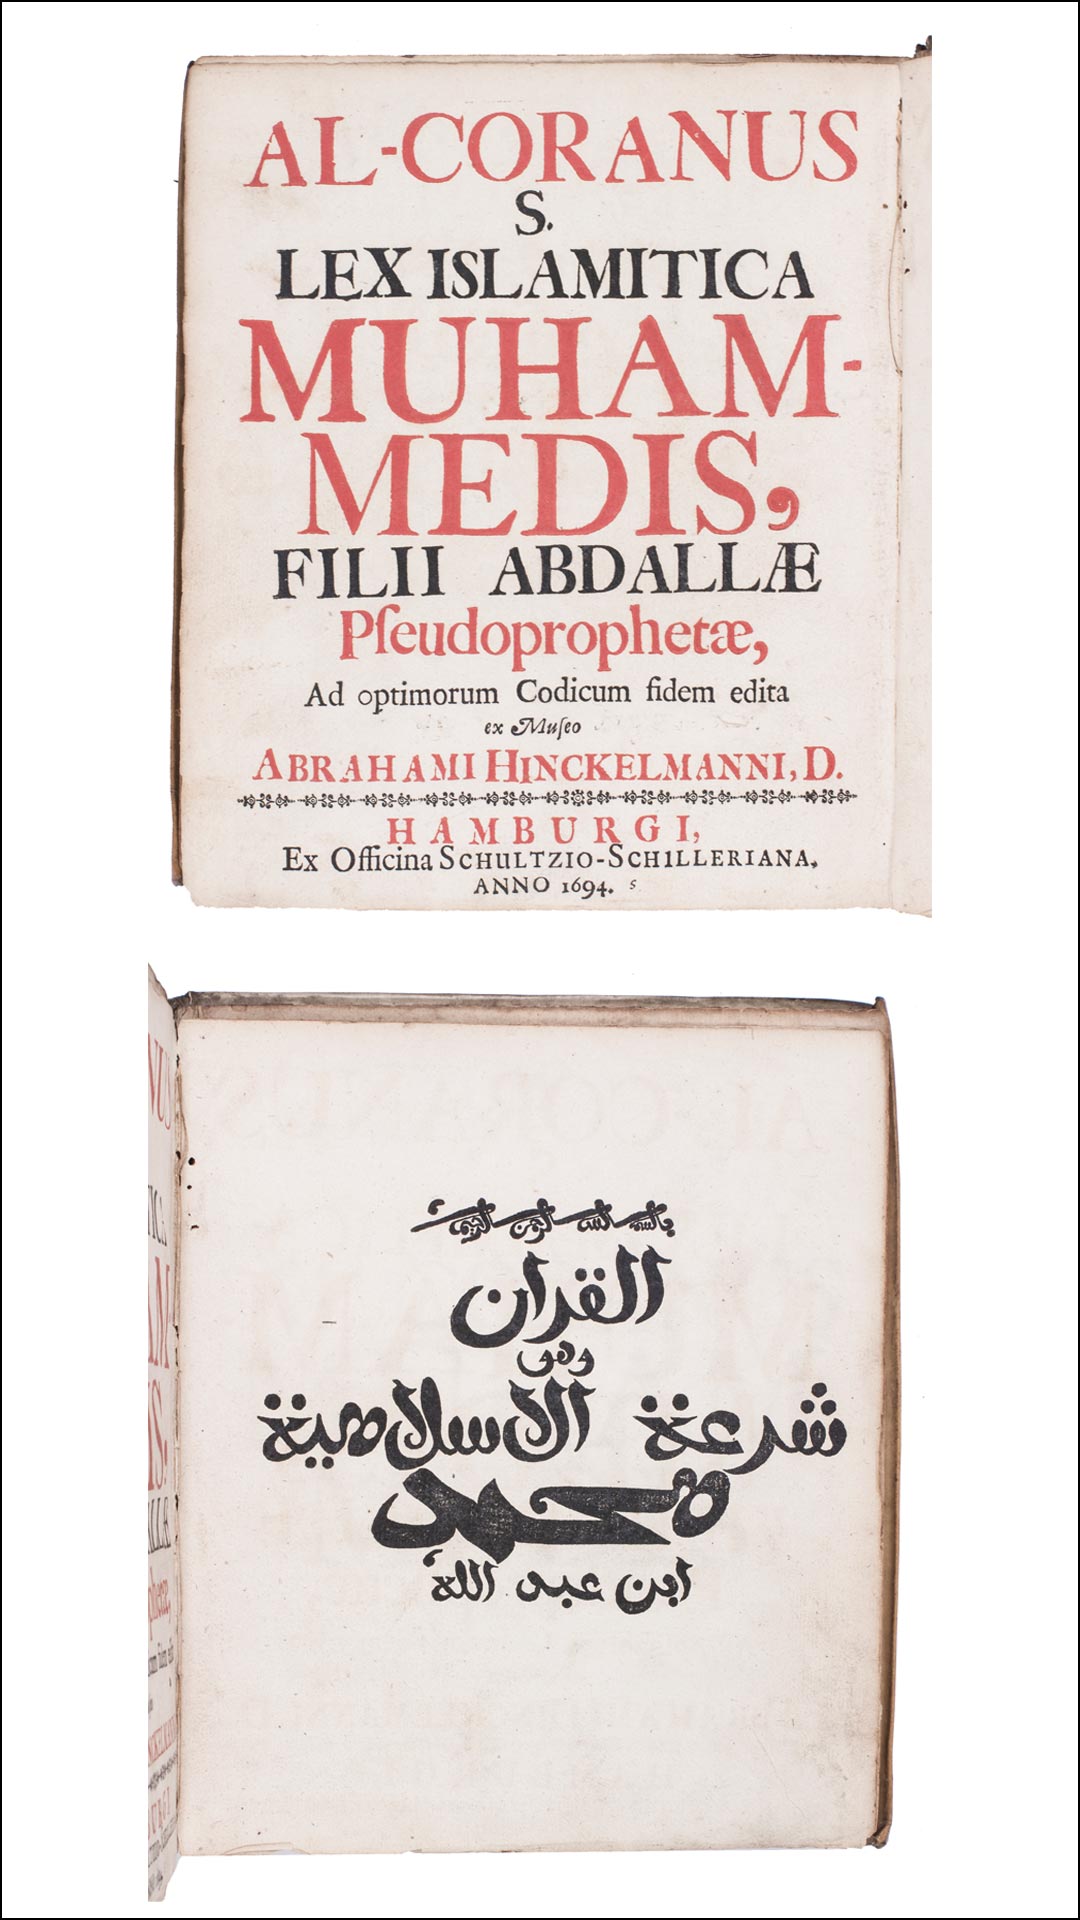 Title page of a book with text in Arabic script